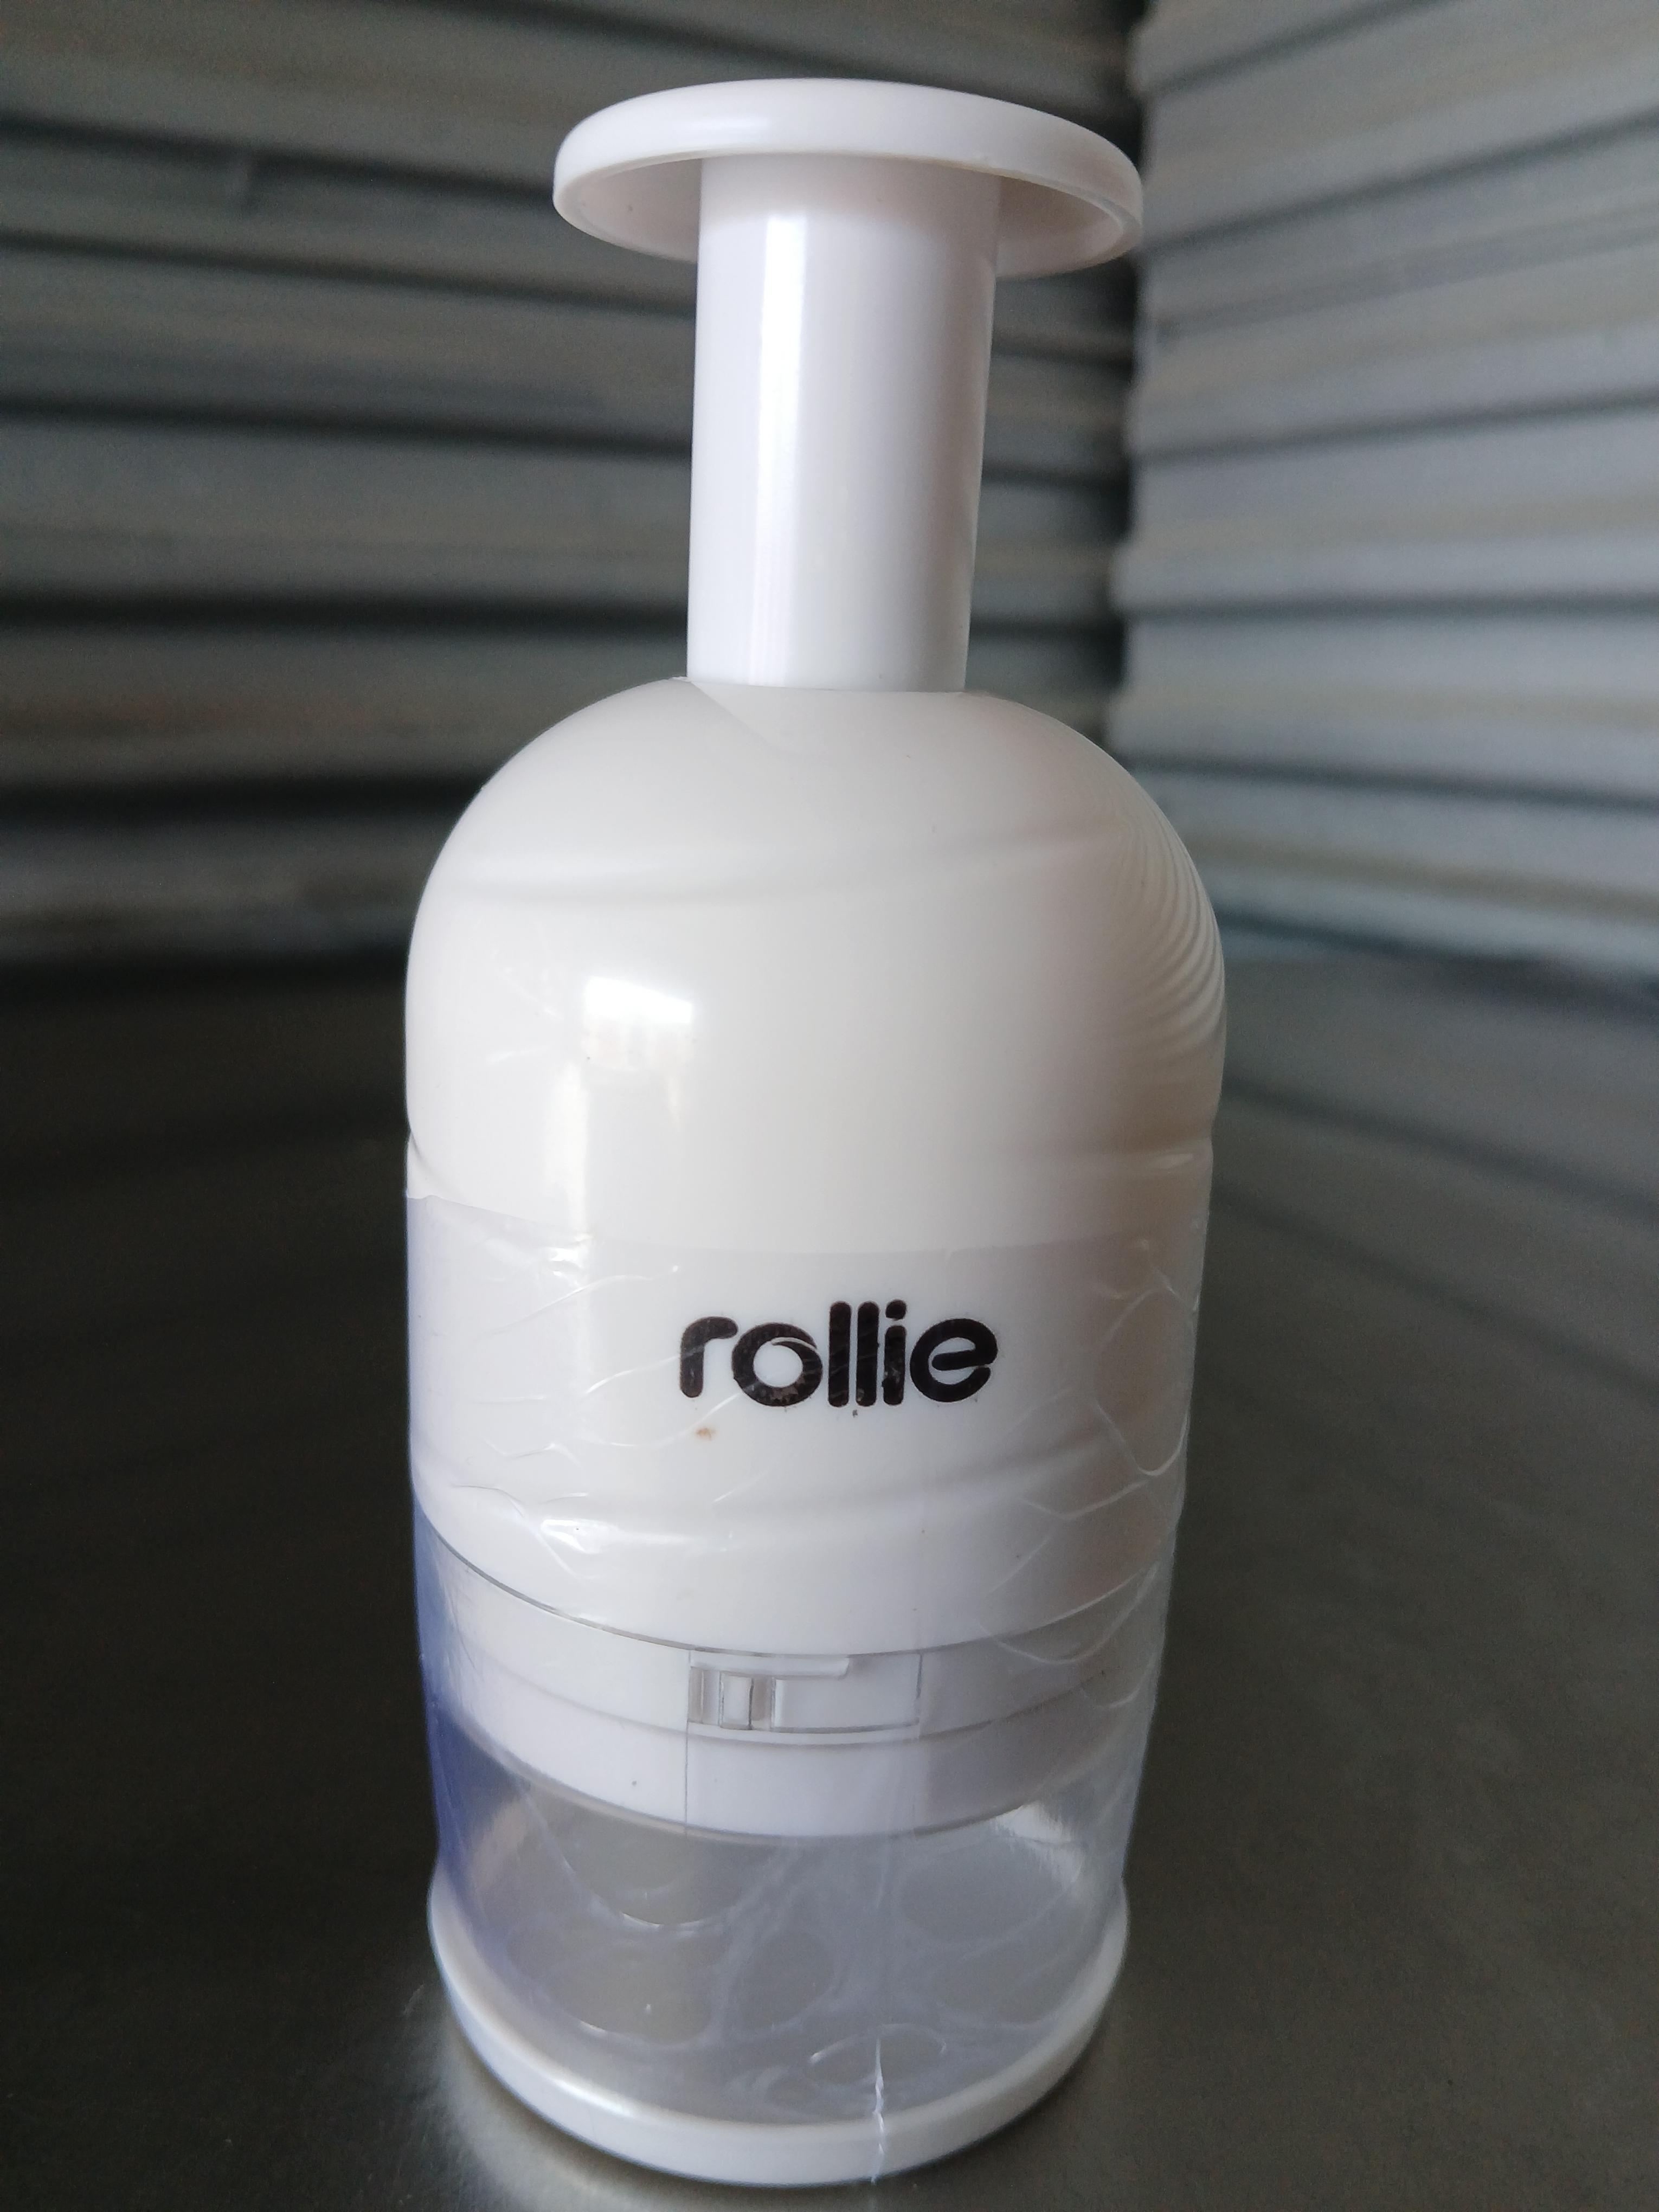 ROLLIE Food Chopper / BRAND NEW Rollie Herb Chopper - Individually wrapped for easy resale. If you a